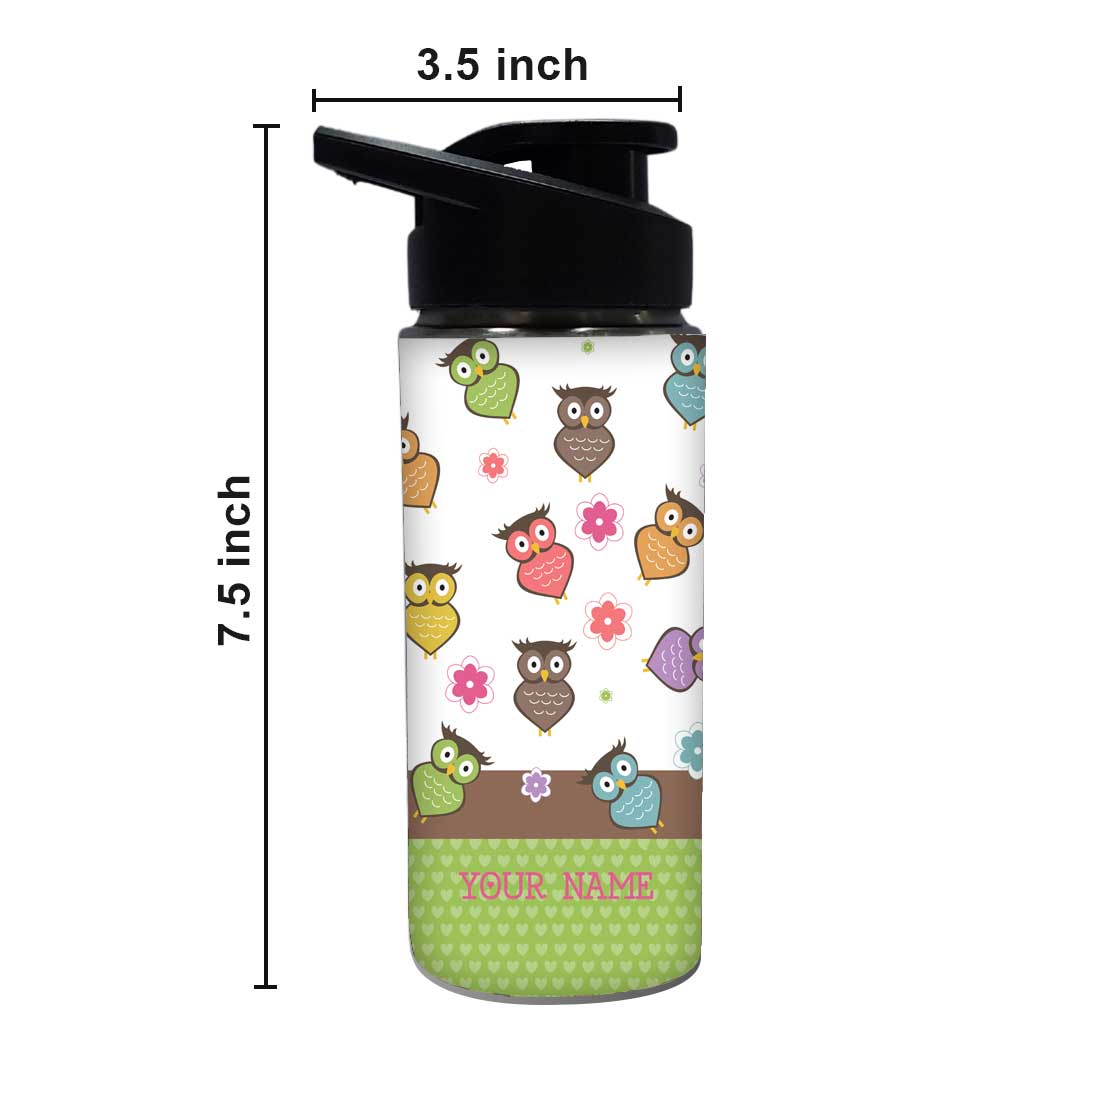 Customised Water Bottle with Name Printed-Owl and Floral Nutcase